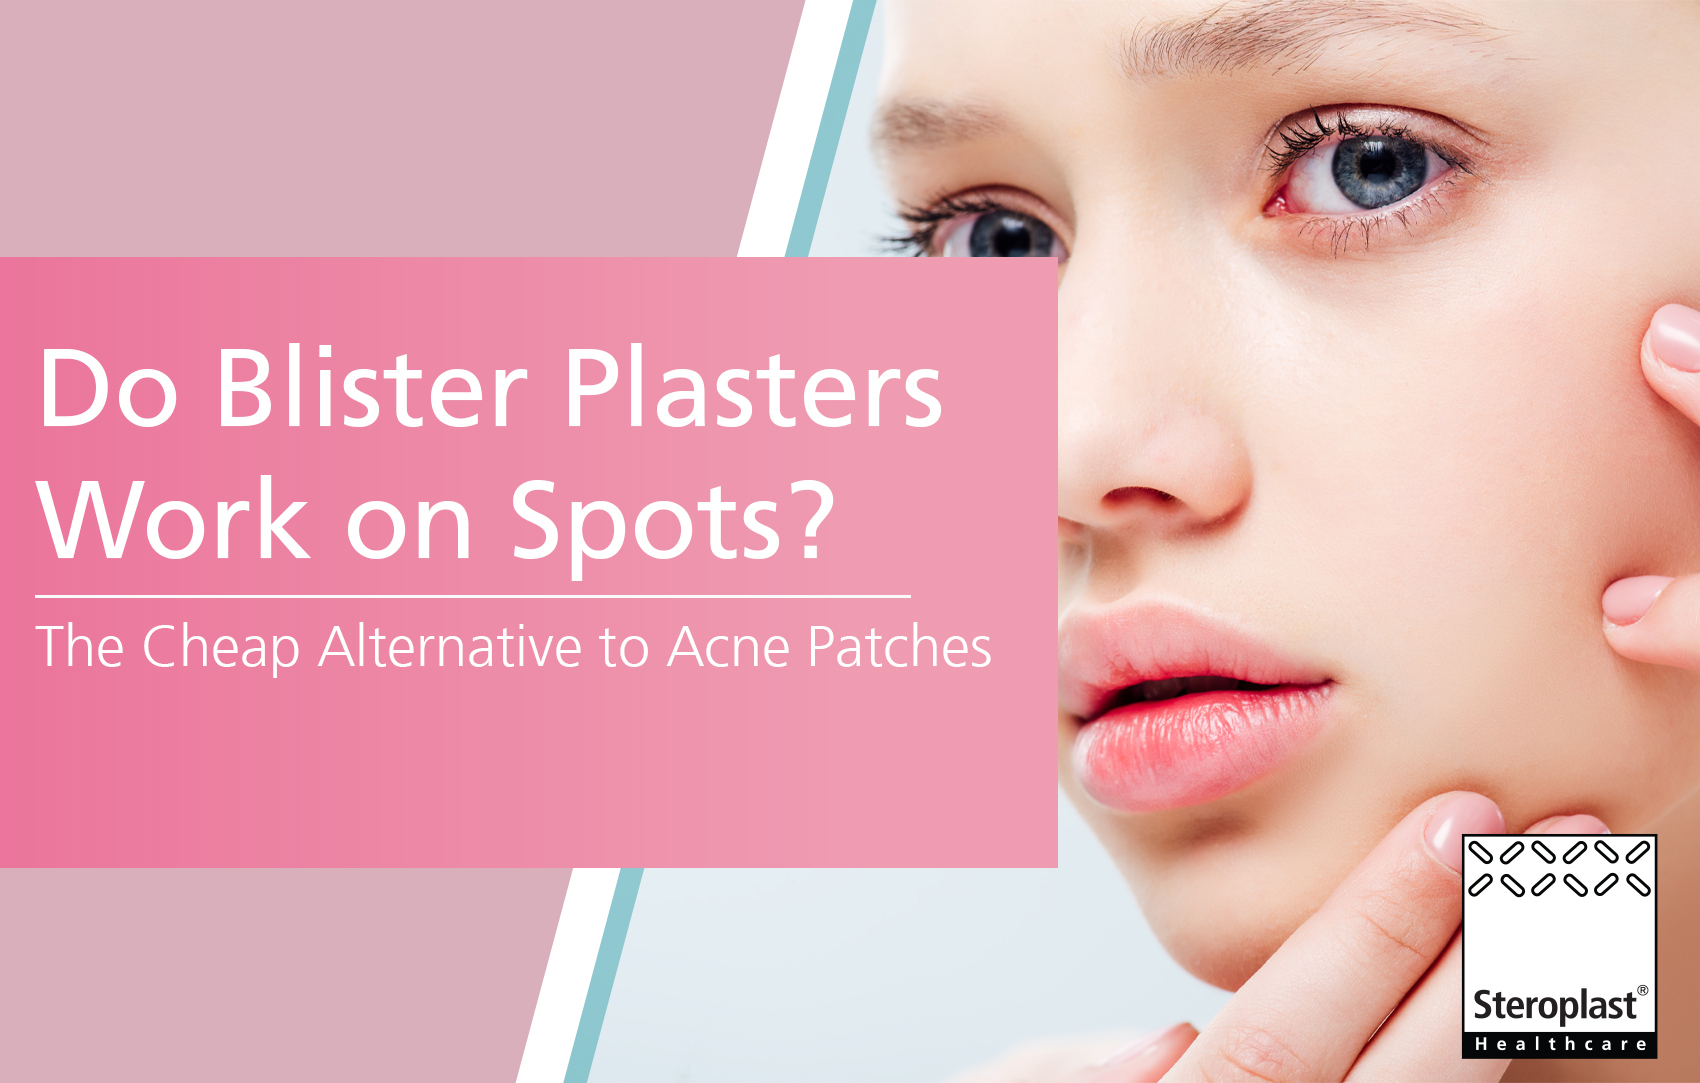 Do Blister Plasters Work on Spots? The Cheap Alternative to Acne Patches